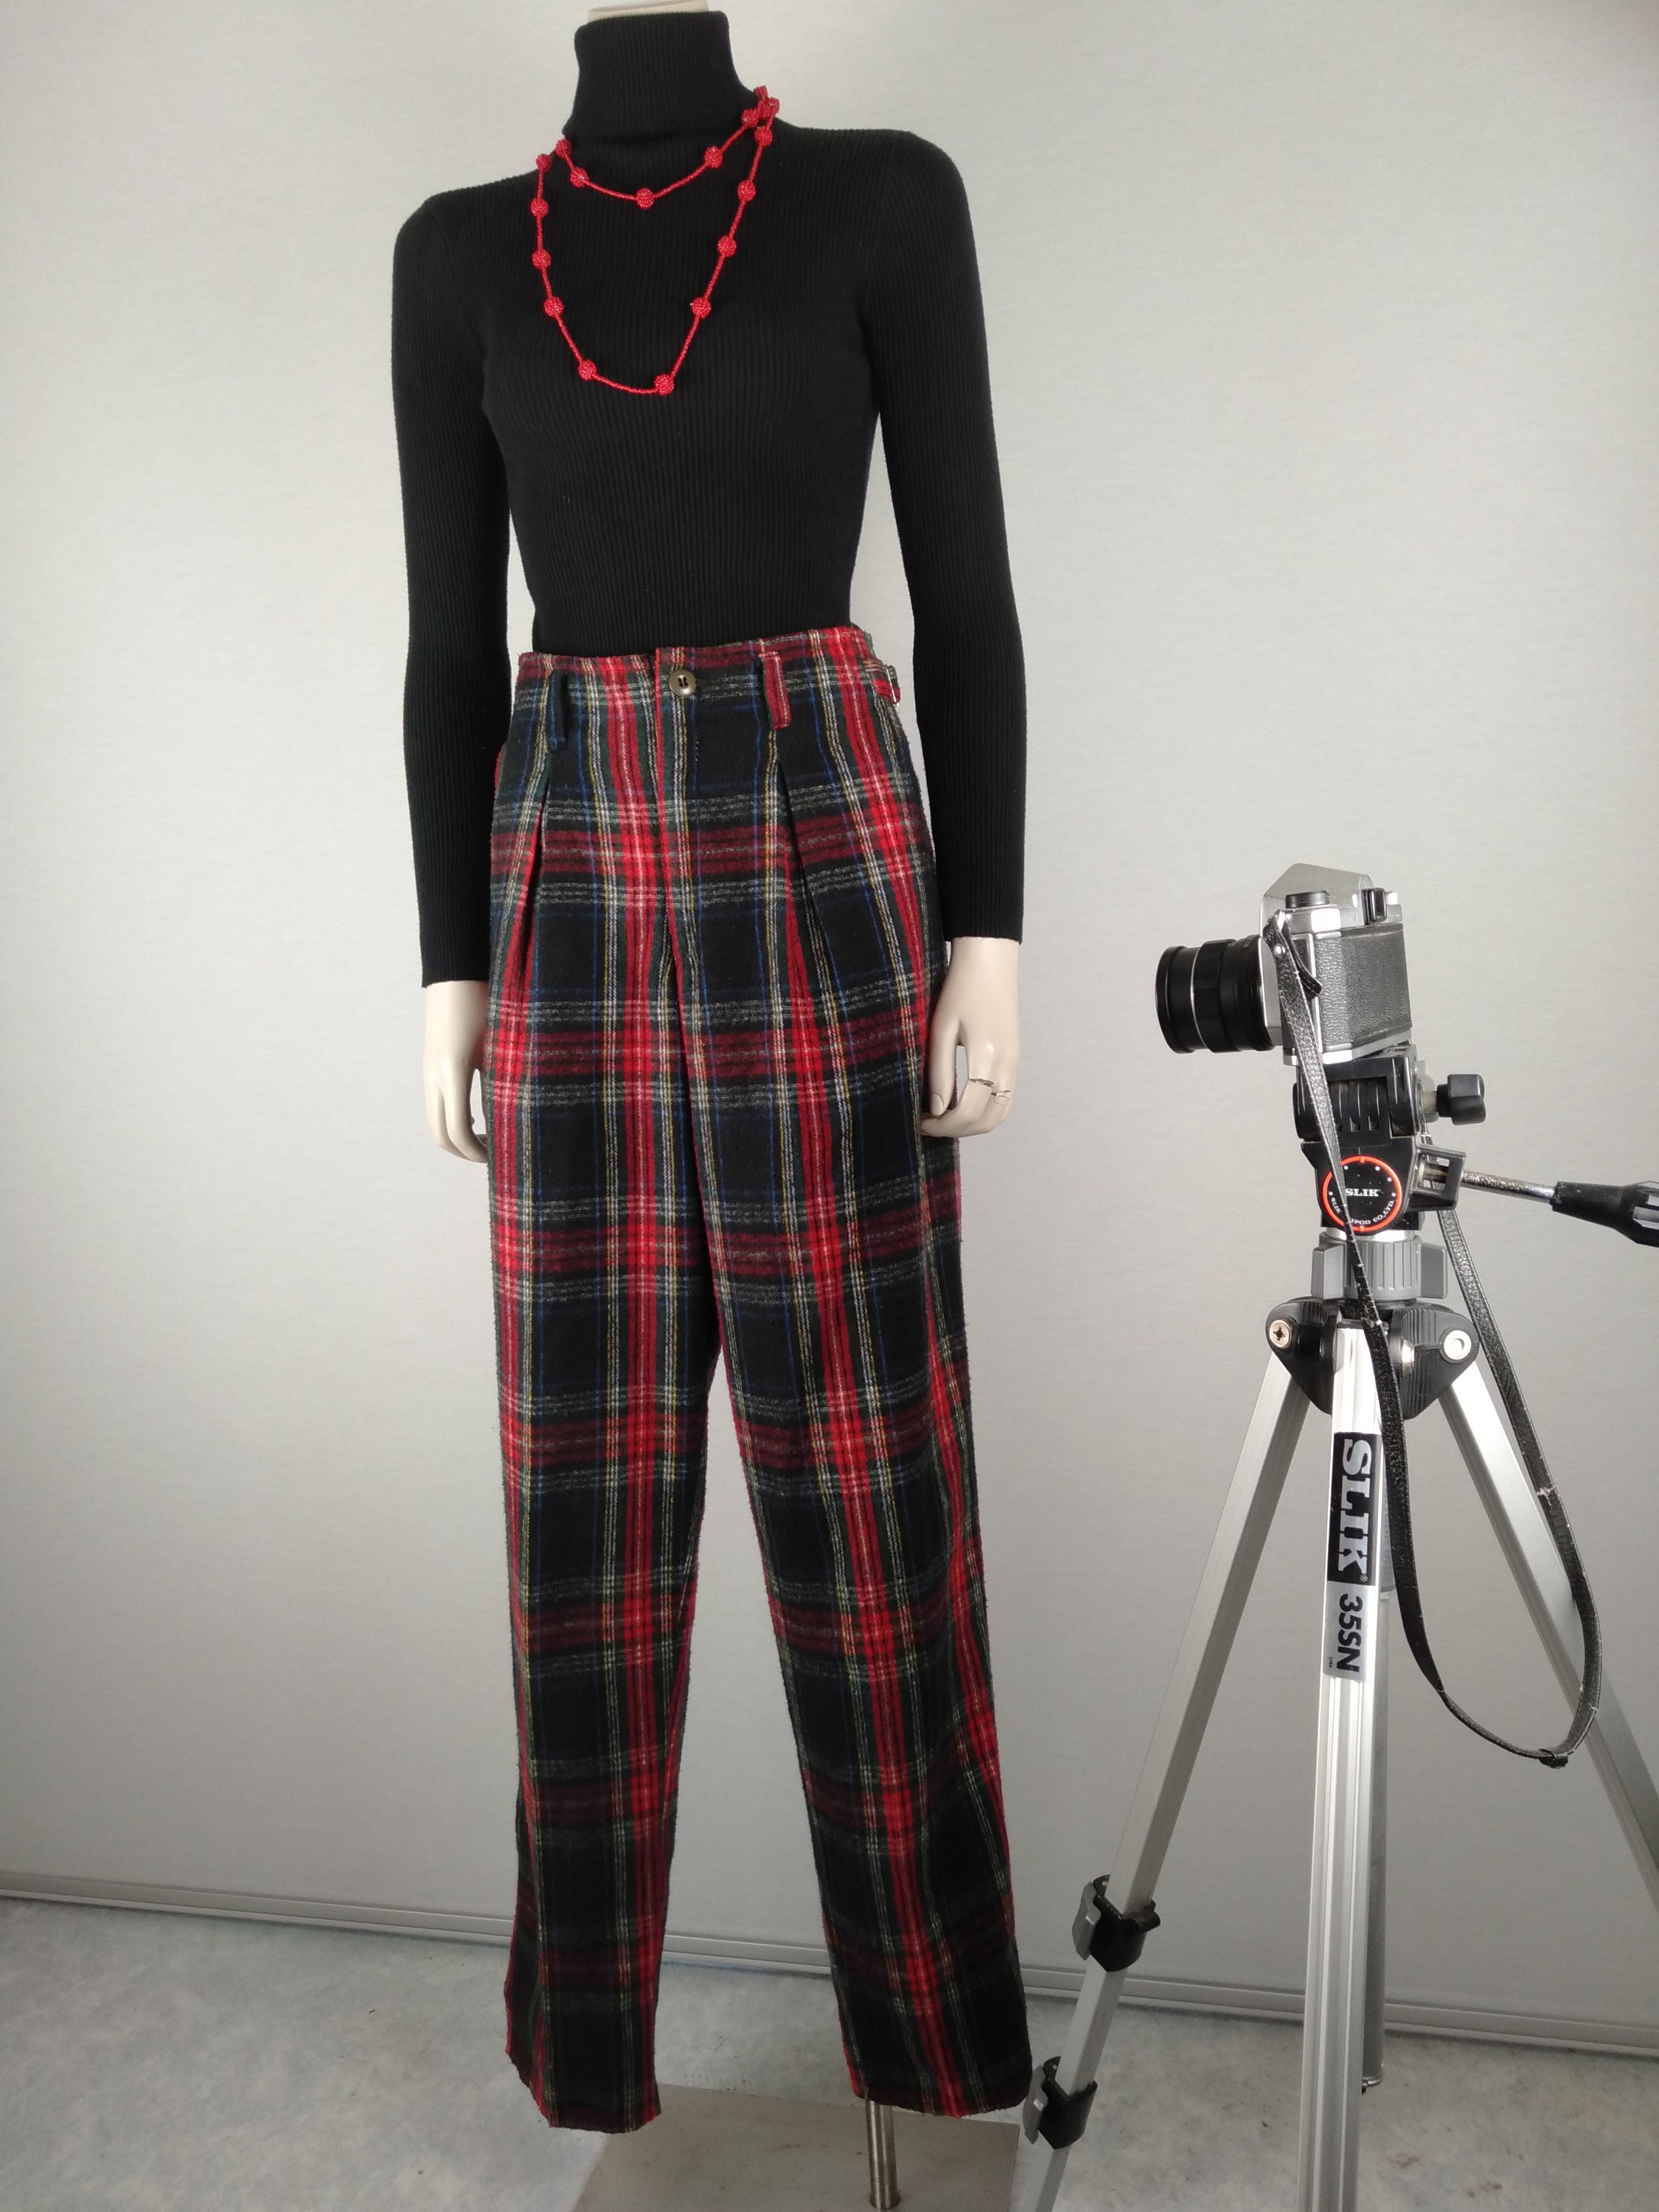 Red Plaid Pants Outfits Online, SAVE 51% - wildlifeasia.org.au